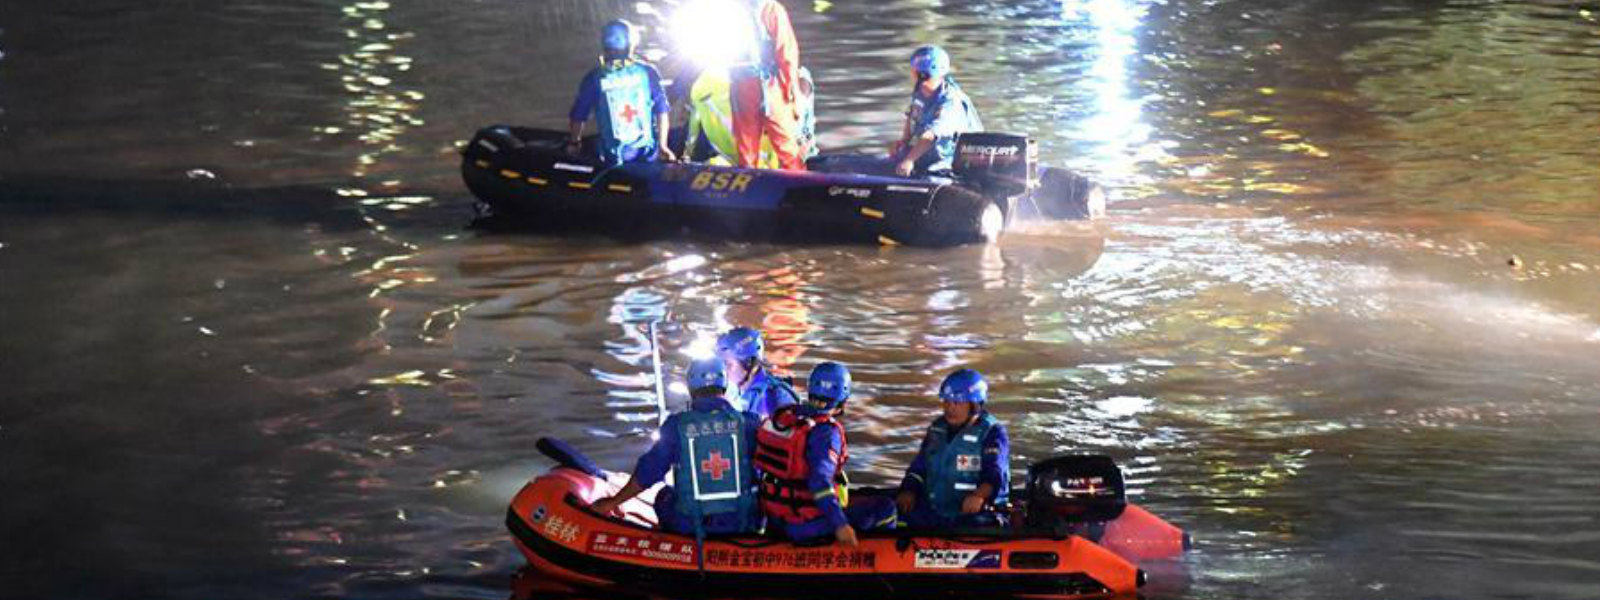 Dragon boat accident claims lives of 17